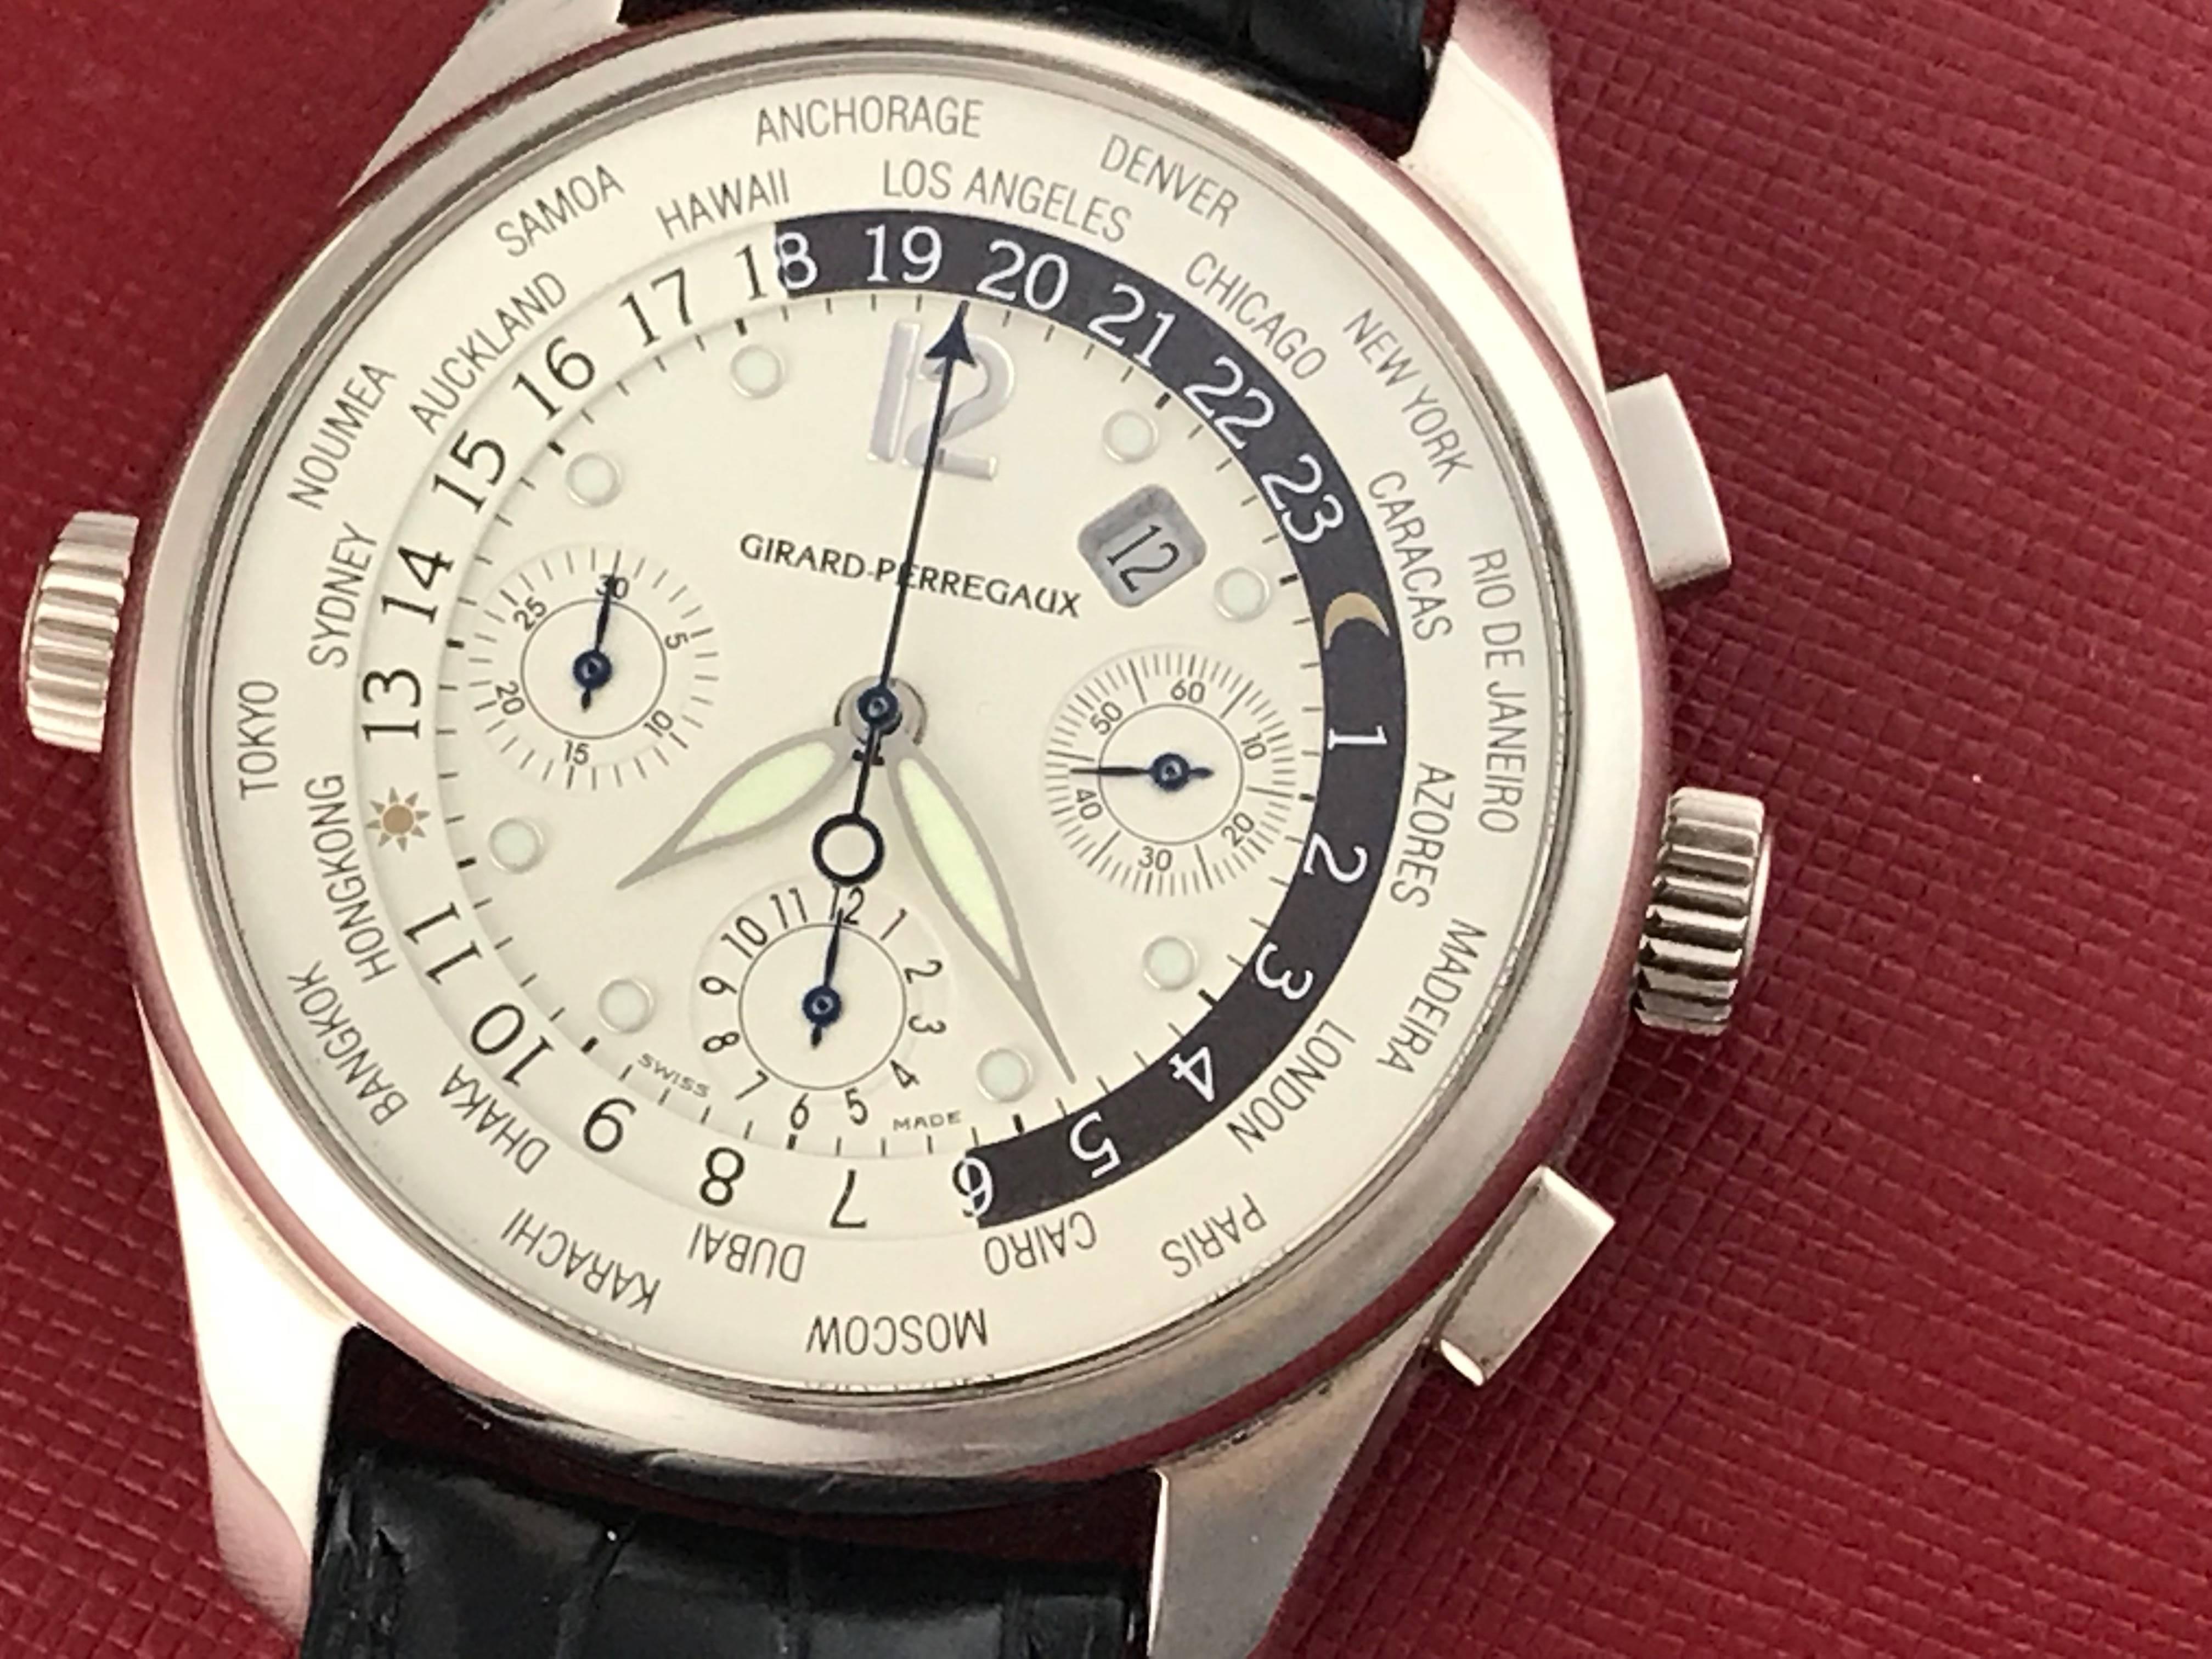 Girard Perregaux World Time Model 49805.53.151 Pre Owned Mens Automatic World Time Chronograph and GMT Men's wrist watch. Off-White Dial with cities of the world around outside edge and luminous hands and hour markers. Heavy 18k White Gold case with